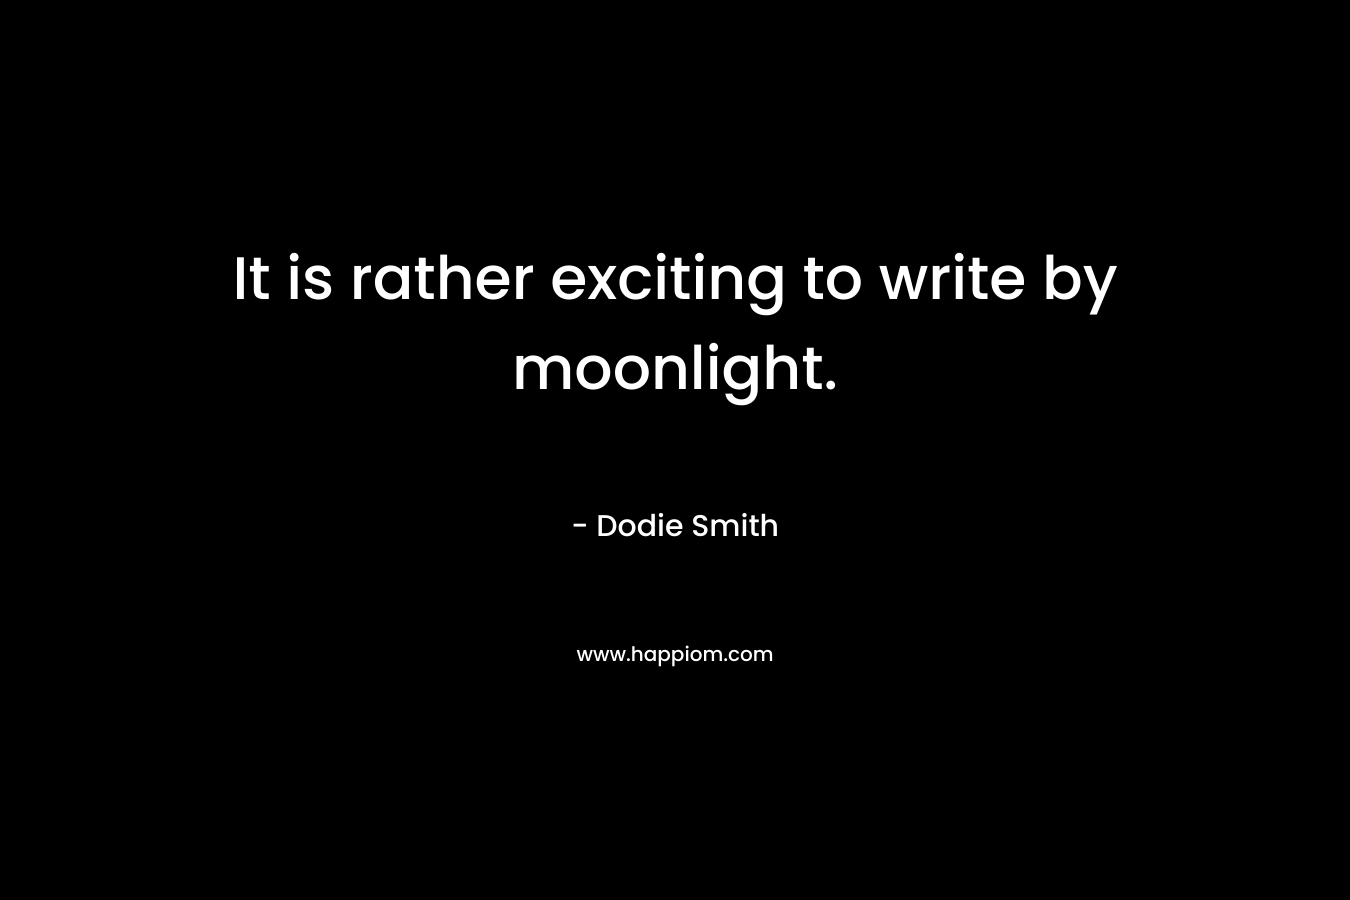 It is rather exciting to write by moonlight.